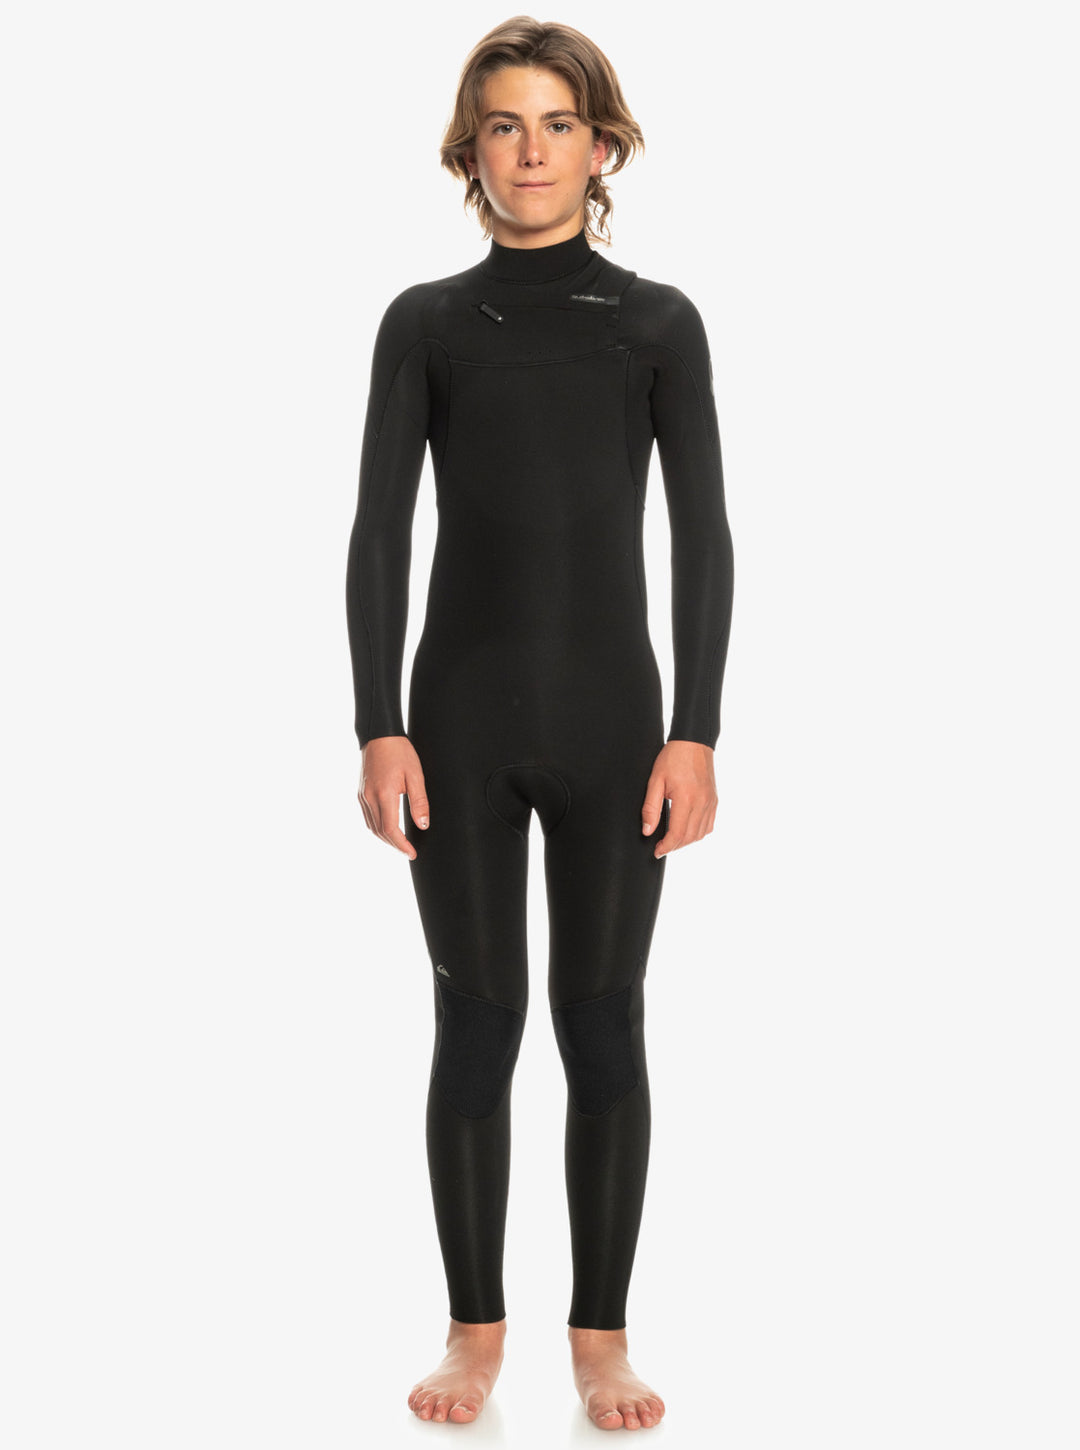 Quiksilver Boy's 8-16 3/2Mm Everyday Sessions Chest Zip Wetsuit - Black - Sun Diego Boardshop